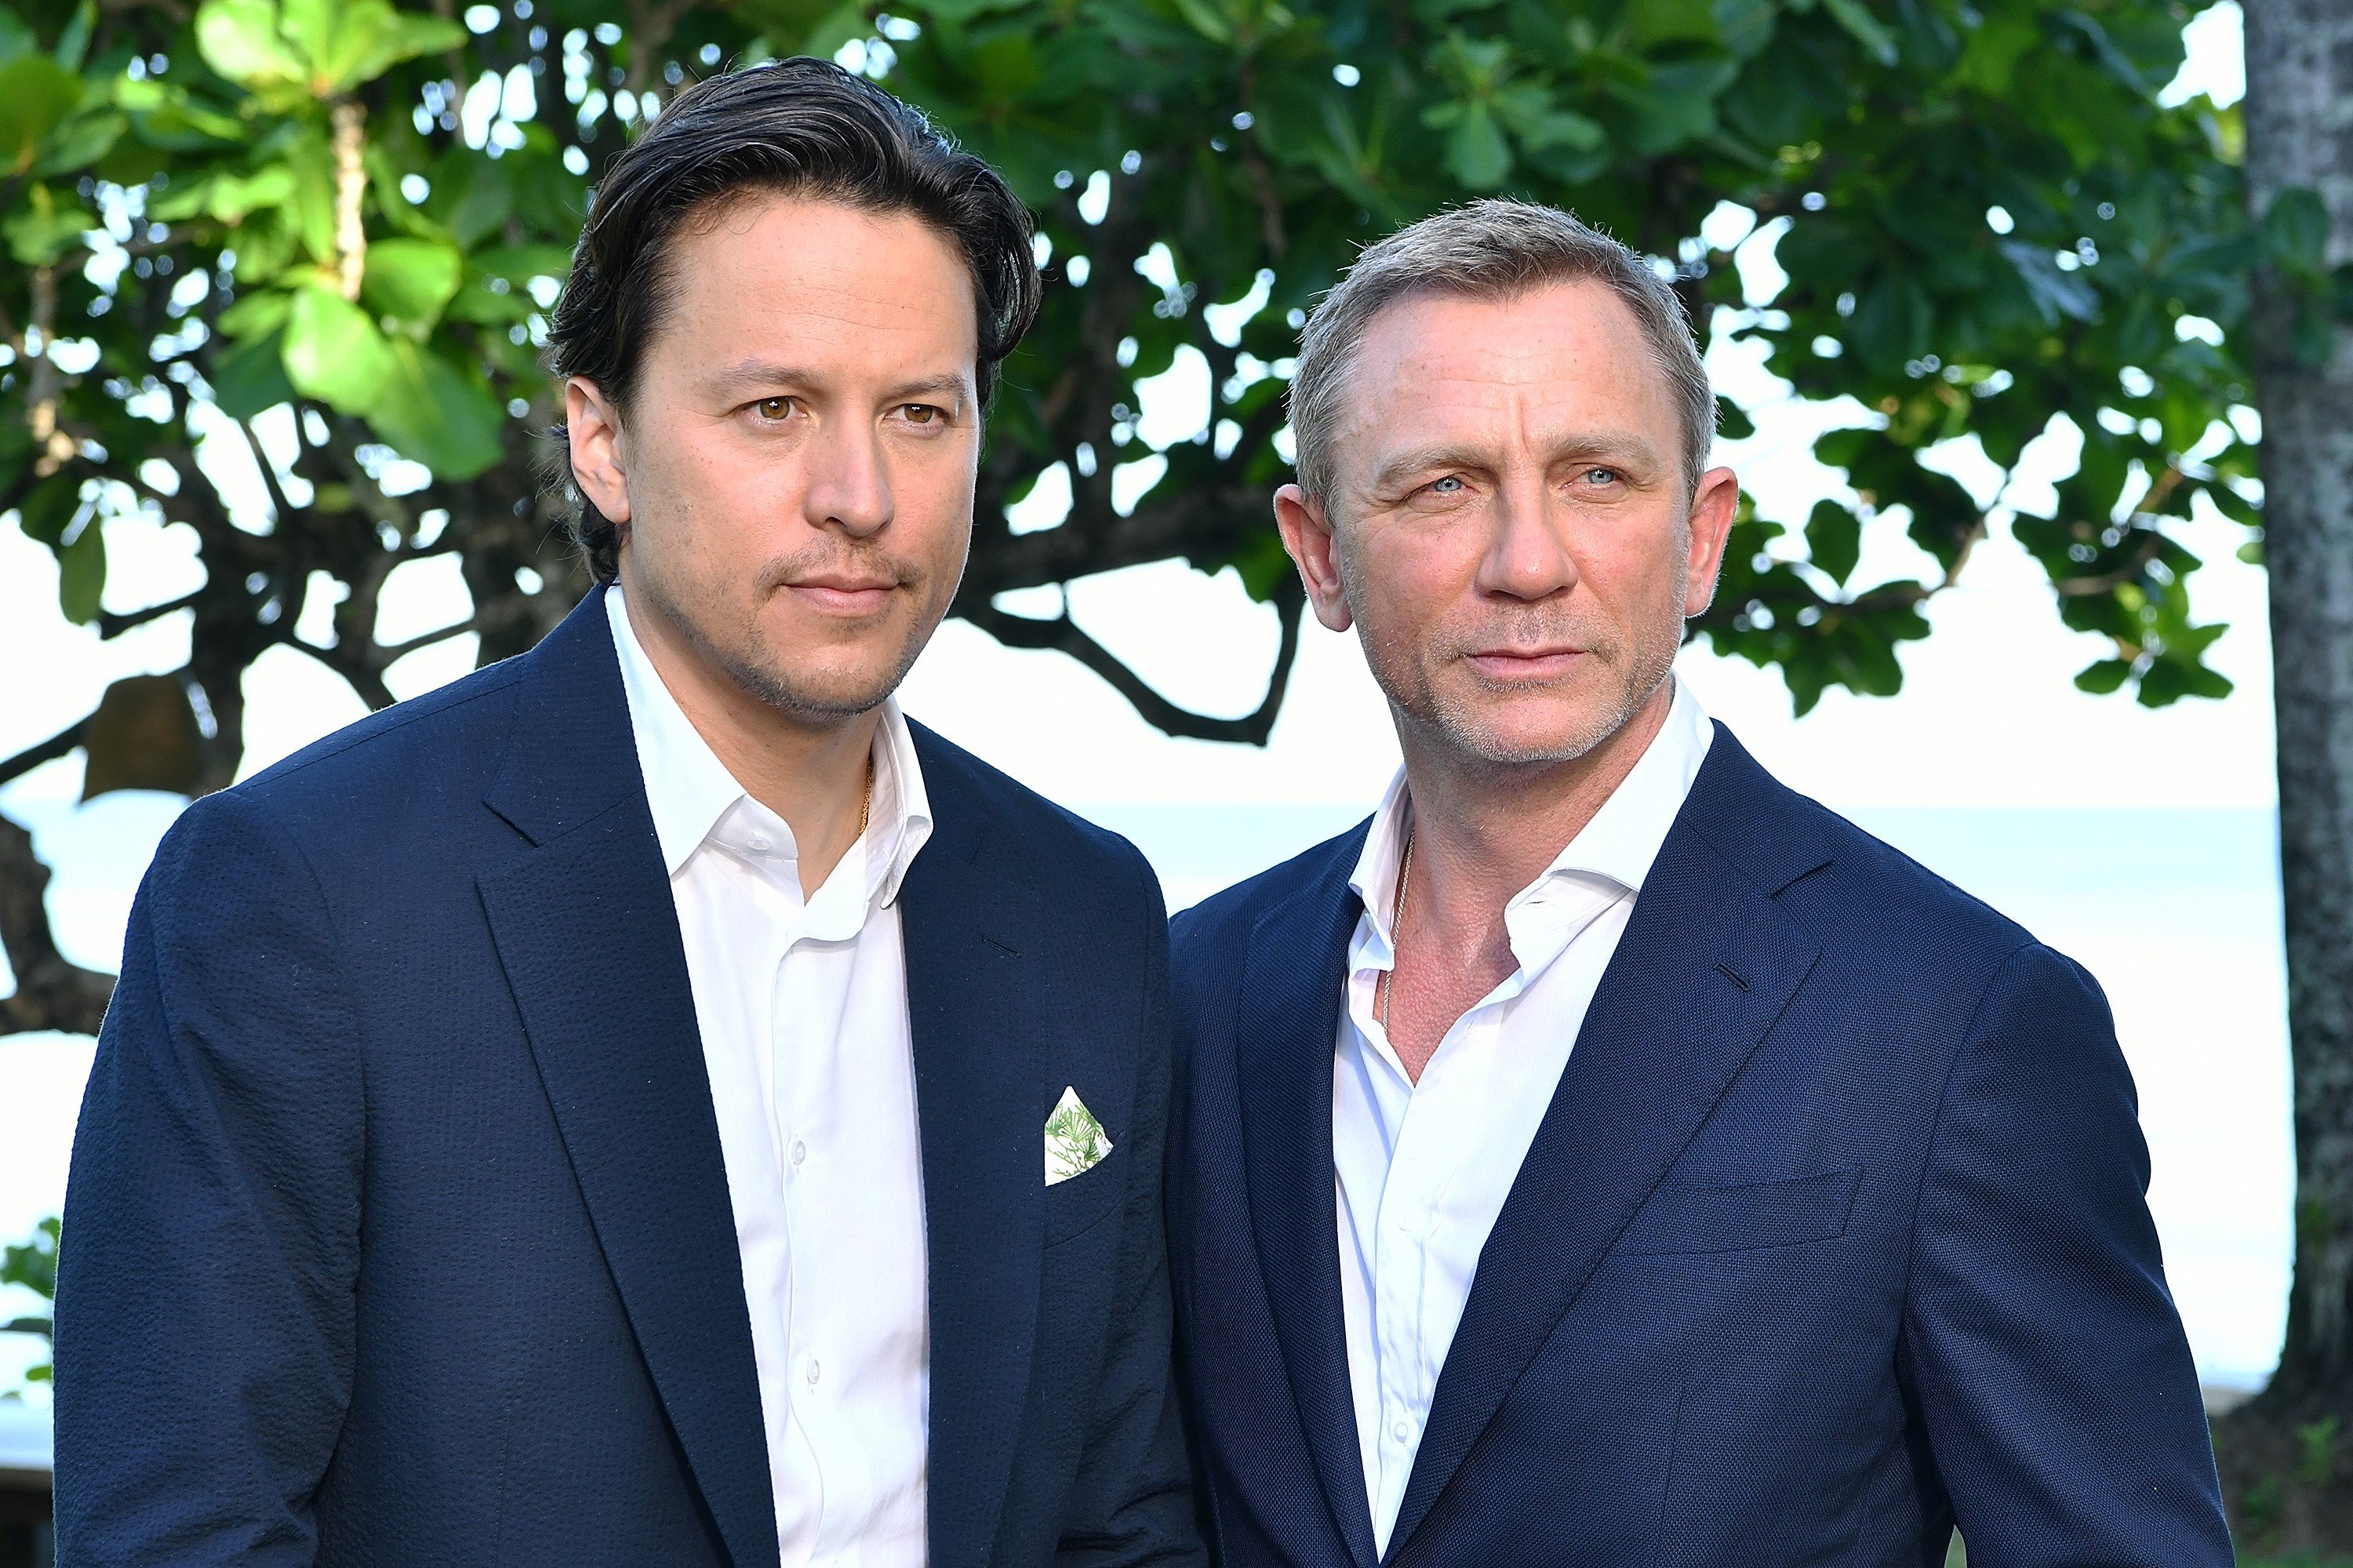 Cary Fukunaga and Daniel Craig, both in blue jackets and white shirts, at the 'Bond 25' film launch in 2019.